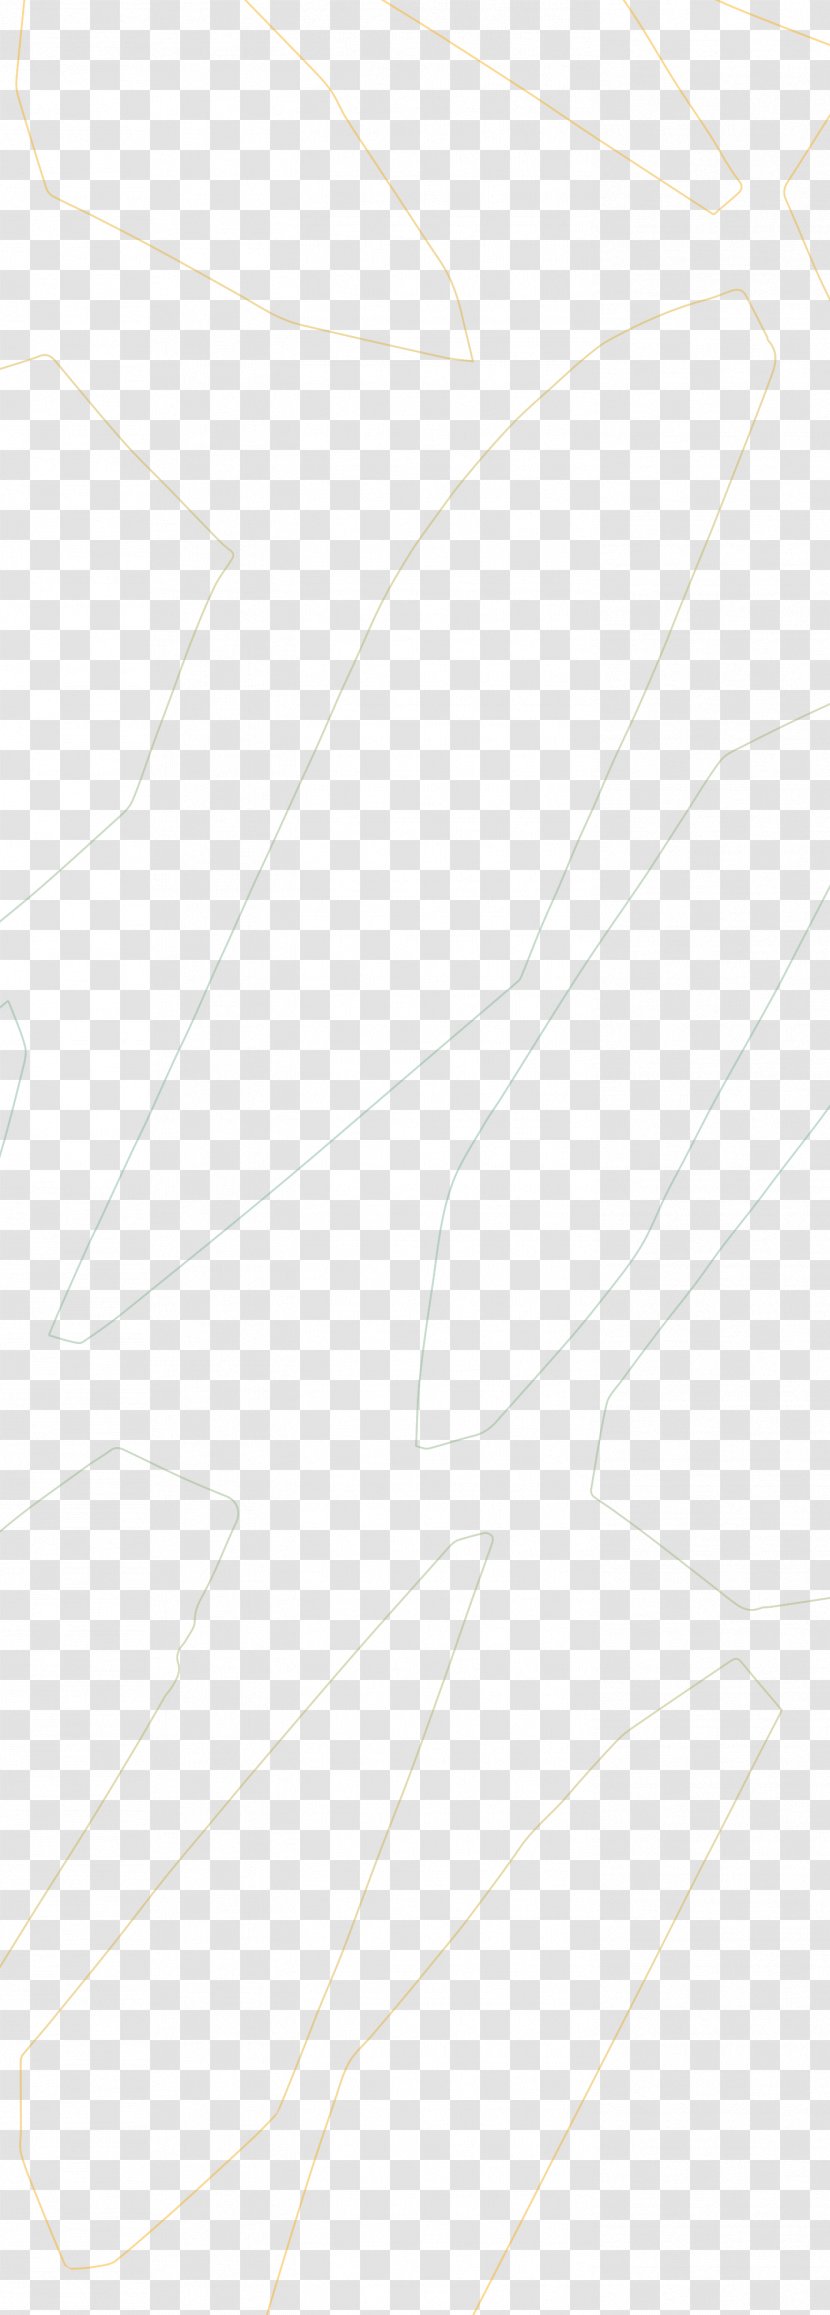 Drawing White Line Pattern - Texture Transparent PNG